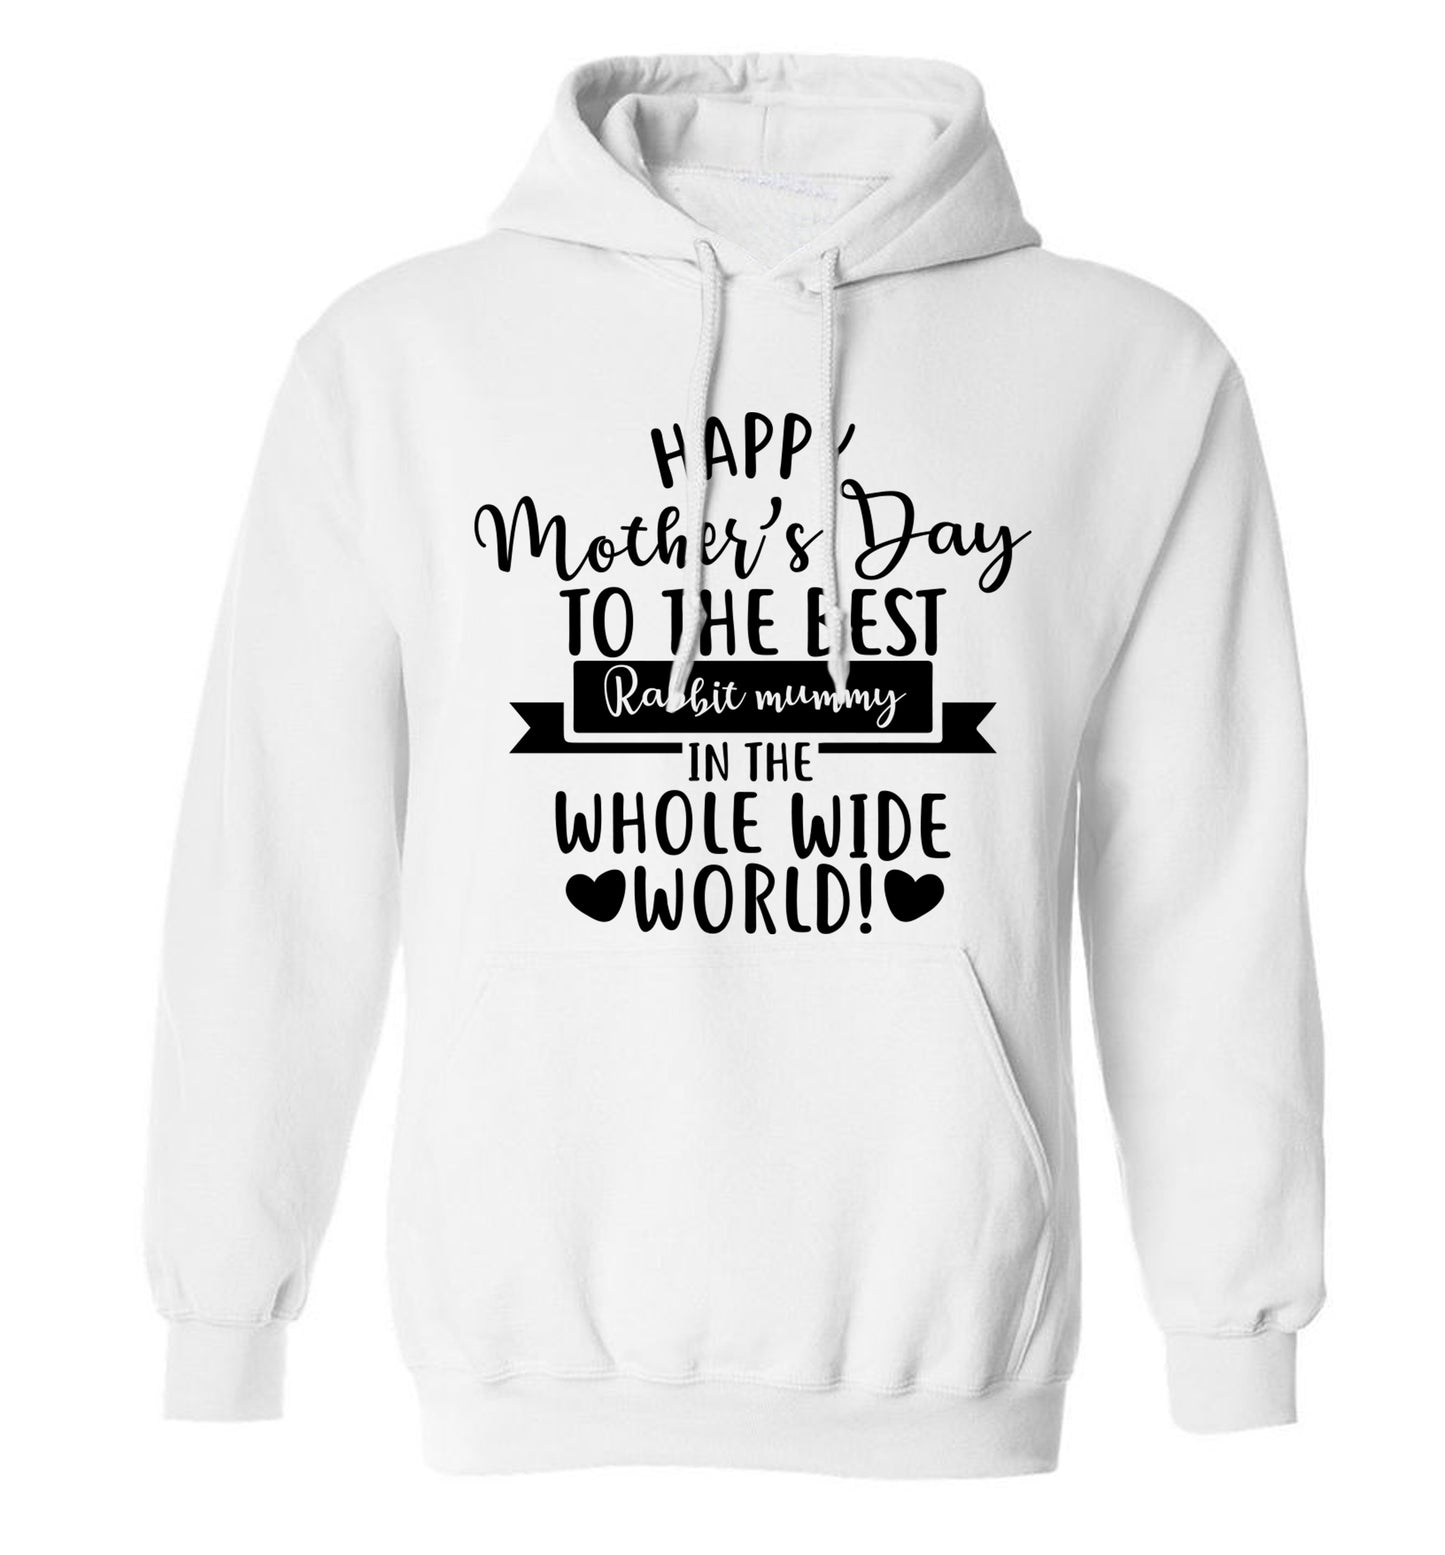 Happy mother's day to the best rabbit mummy in the world adults unisex white hoodie 2XL